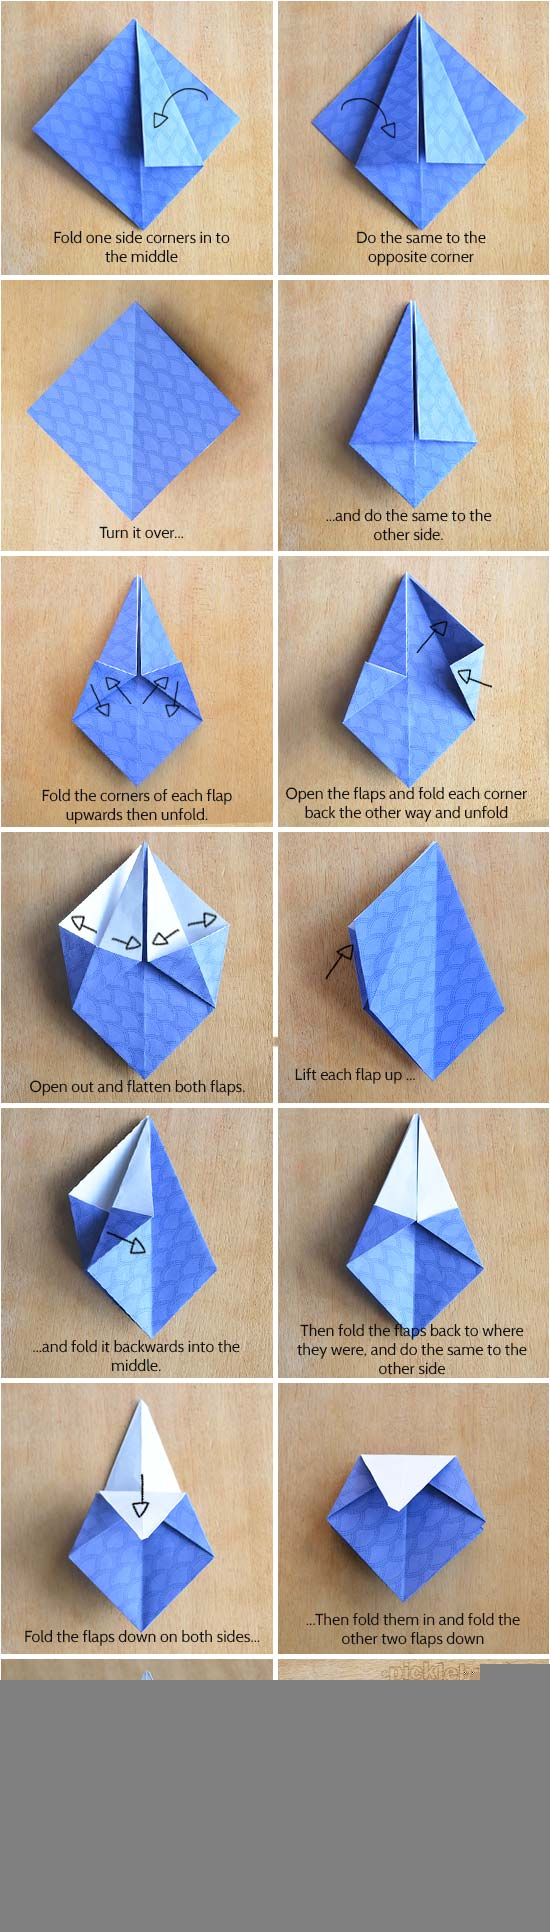 Origami Star How To Make Origami Star Boxes With Printable Origami Paper Picklebums